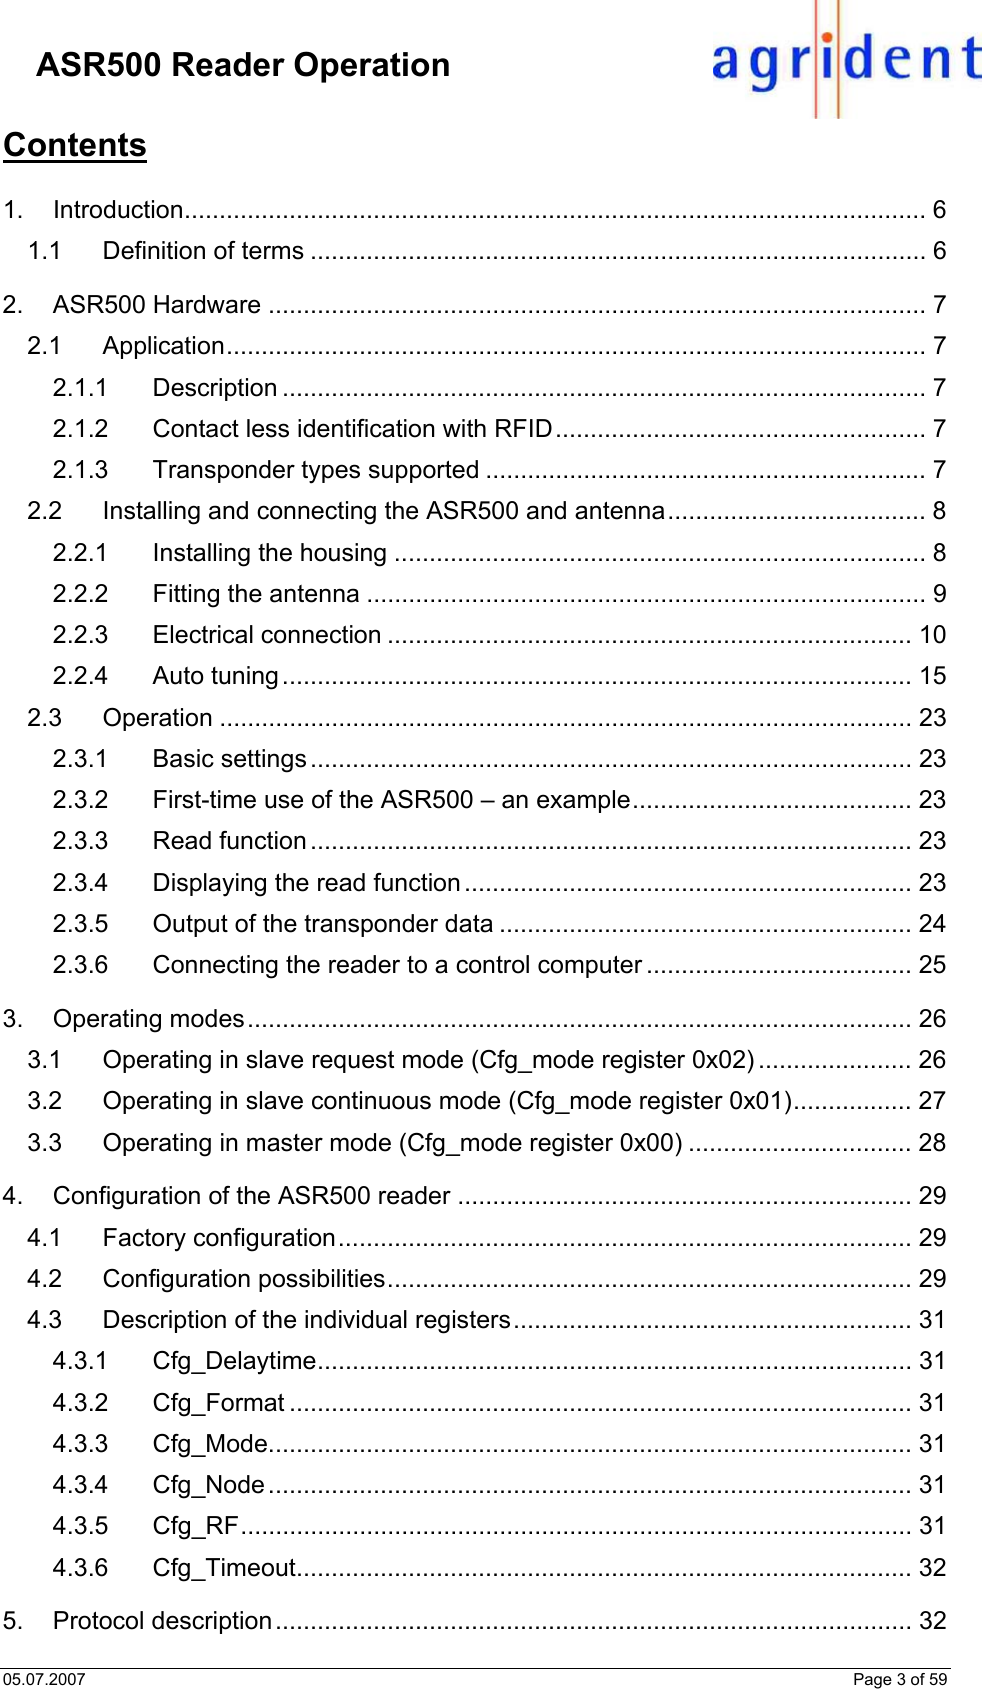 05.07.2007    Page 3 of 59     ASR500 Reader Operation Contents  1. Introduction.......................................................................................................... 6 1.1 Definition of terms ........................................................................................ 6 2. ASR500 Hardware .............................................................................................. 7 2.1 Application.................................................................................................... 7 2.1.1 Description ............................................................................................ 7 2.1.2 Contact less identification with RFID..................................................... 7 2.1.3 Transponder types supported ............................................................... 7 2.2 Installing and connecting the ASR500 and antenna..................................... 8 2.2.1 Installing the housing ............................................................................ 8 2.2.2 Fitting the antenna ................................................................................ 9 2.2.3 Electrical connection ........................................................................... 10 2.2.4 Auto tuning.......................................................................................... 15 2.3 Operation ................................................................................................... 23 2.3.1 Basic settings ...................................................................................... 23 2.3.2 First-time use of the ASR500 – an example........................................ 23 2.3.3 Read function ...................................................................................... 23 2.3.4 Displaying the read function................................................................ 23 2.3.5 Output of the transponder data ........................................................... 24 2.3.6 Connecting the reader to a control computer ...................................... 25 3. Operating modes............................................................................................... 26 3.1 Operating in slave request mode (Cfg_mode register 0x02) ...................... 26 3.2 Operating in slave continuous mode (Cfg_mode register 0x01)................. 27 3.3 Operating in master mode (Cfg_mode register 0x00) ................................ 28 4. Configuration of the ASR500 reader ................................................................. 29 4.1 Factory configuration.................................................................................. 29 4.2 Configuration possibilities........................................................................... 29 4.3 Description of the individual registers......................................................... 31 4.3.1 Cfg_Delaytime..................................................................................... 31 4.3.2 Cfg_Format ......................................................................................... 31 4.3.3 Cfg_Mode............................................................................................ 31 4.3.4 Cfg_Node............................................................................................ 31 4.3.5 Cfg_RF................................................................................................ 31 4.3.6 Cfg_Timeout........................................................................................ 32 5. Protocol description........................................................................................... 32 